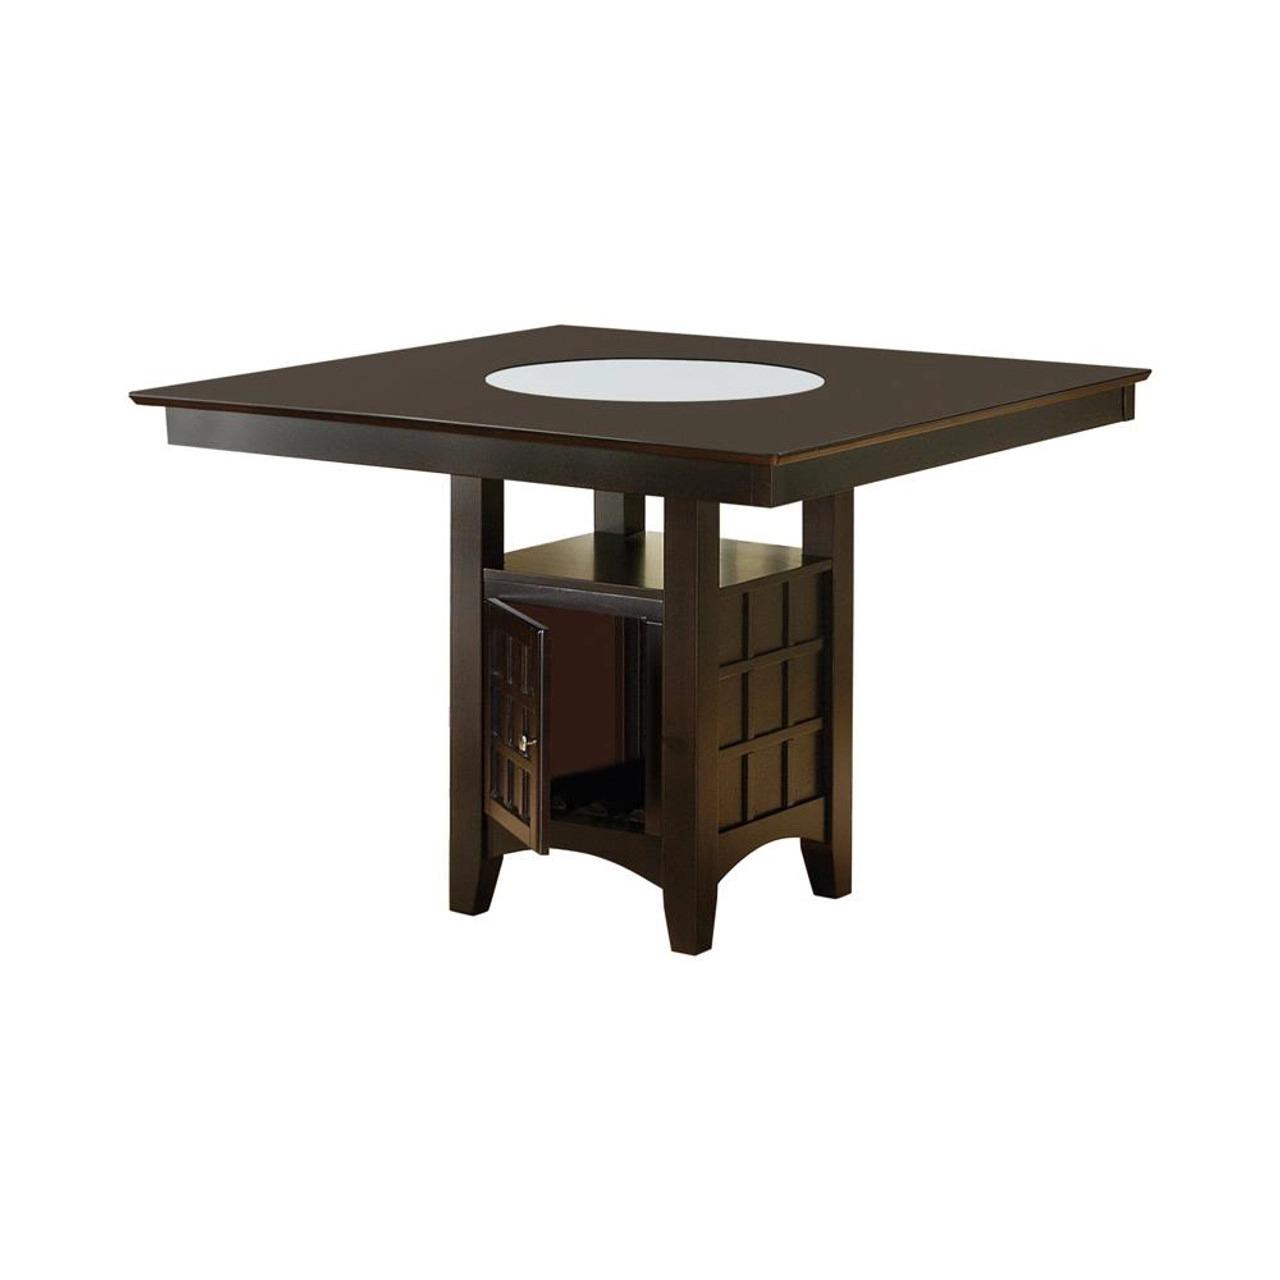 Transitional Counter Height Table 100438 Clanton 100438 in Cappuccino 